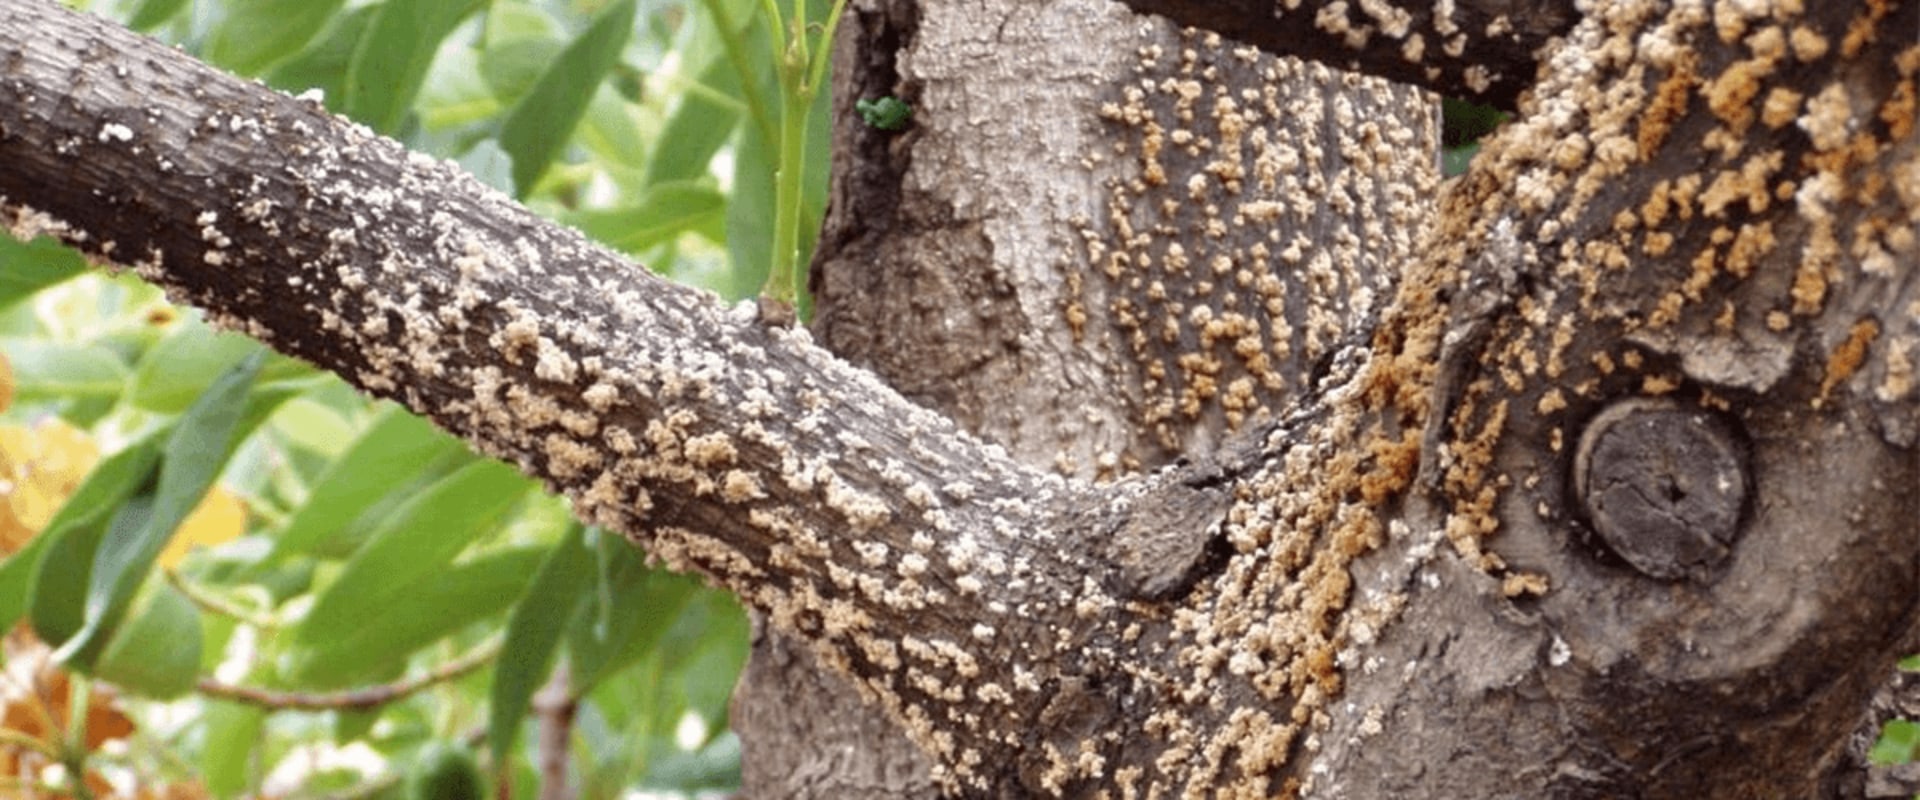 What are common tree diseases?